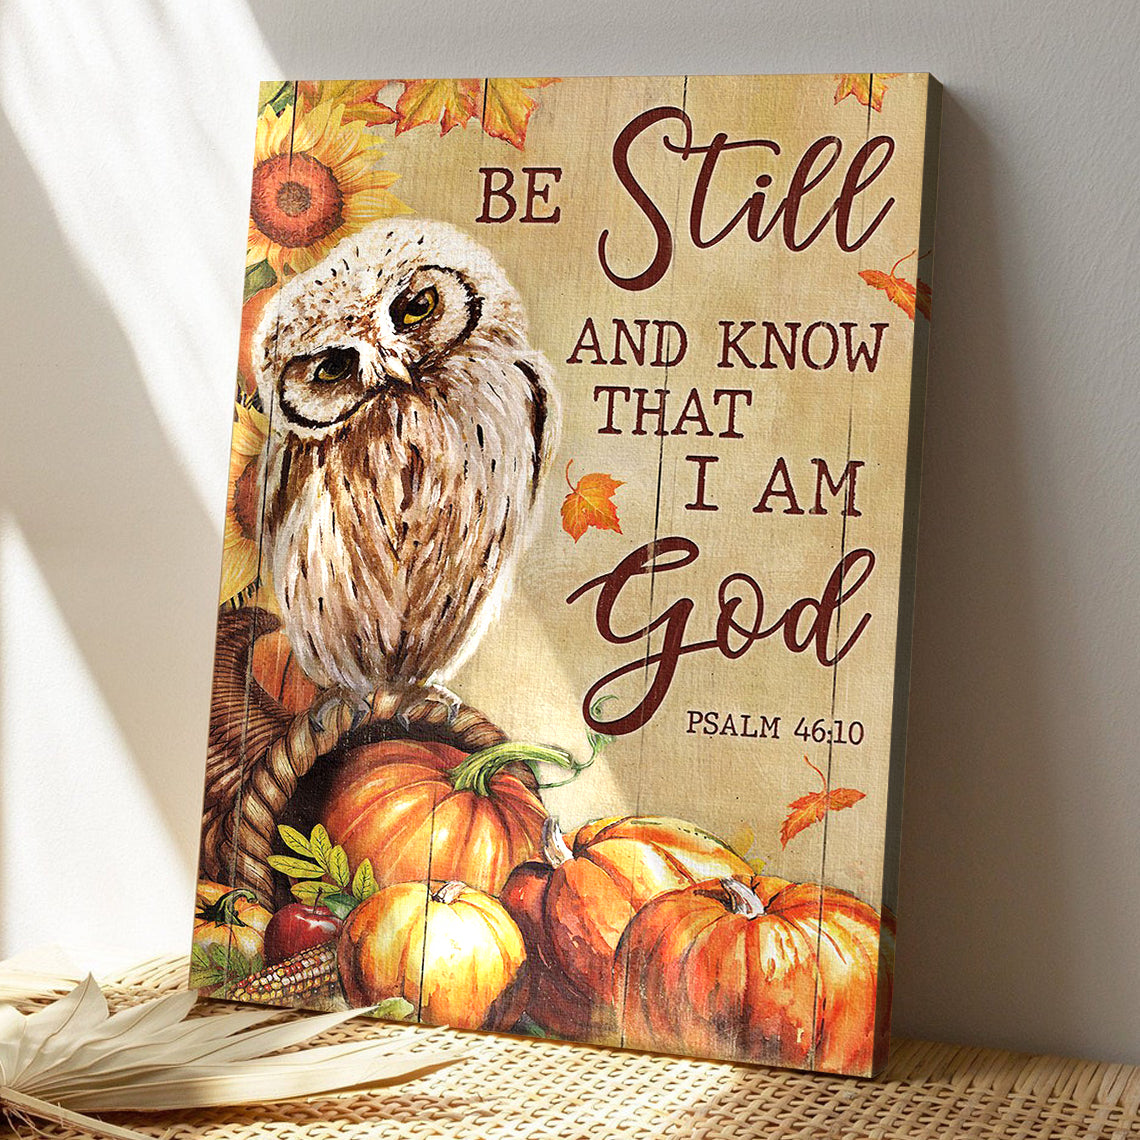 Bible Verse Canvas - God Canvas - Owl With Pumpkins - Be Still And Know That I Am God Canvas Wall Art - Ciaocustom